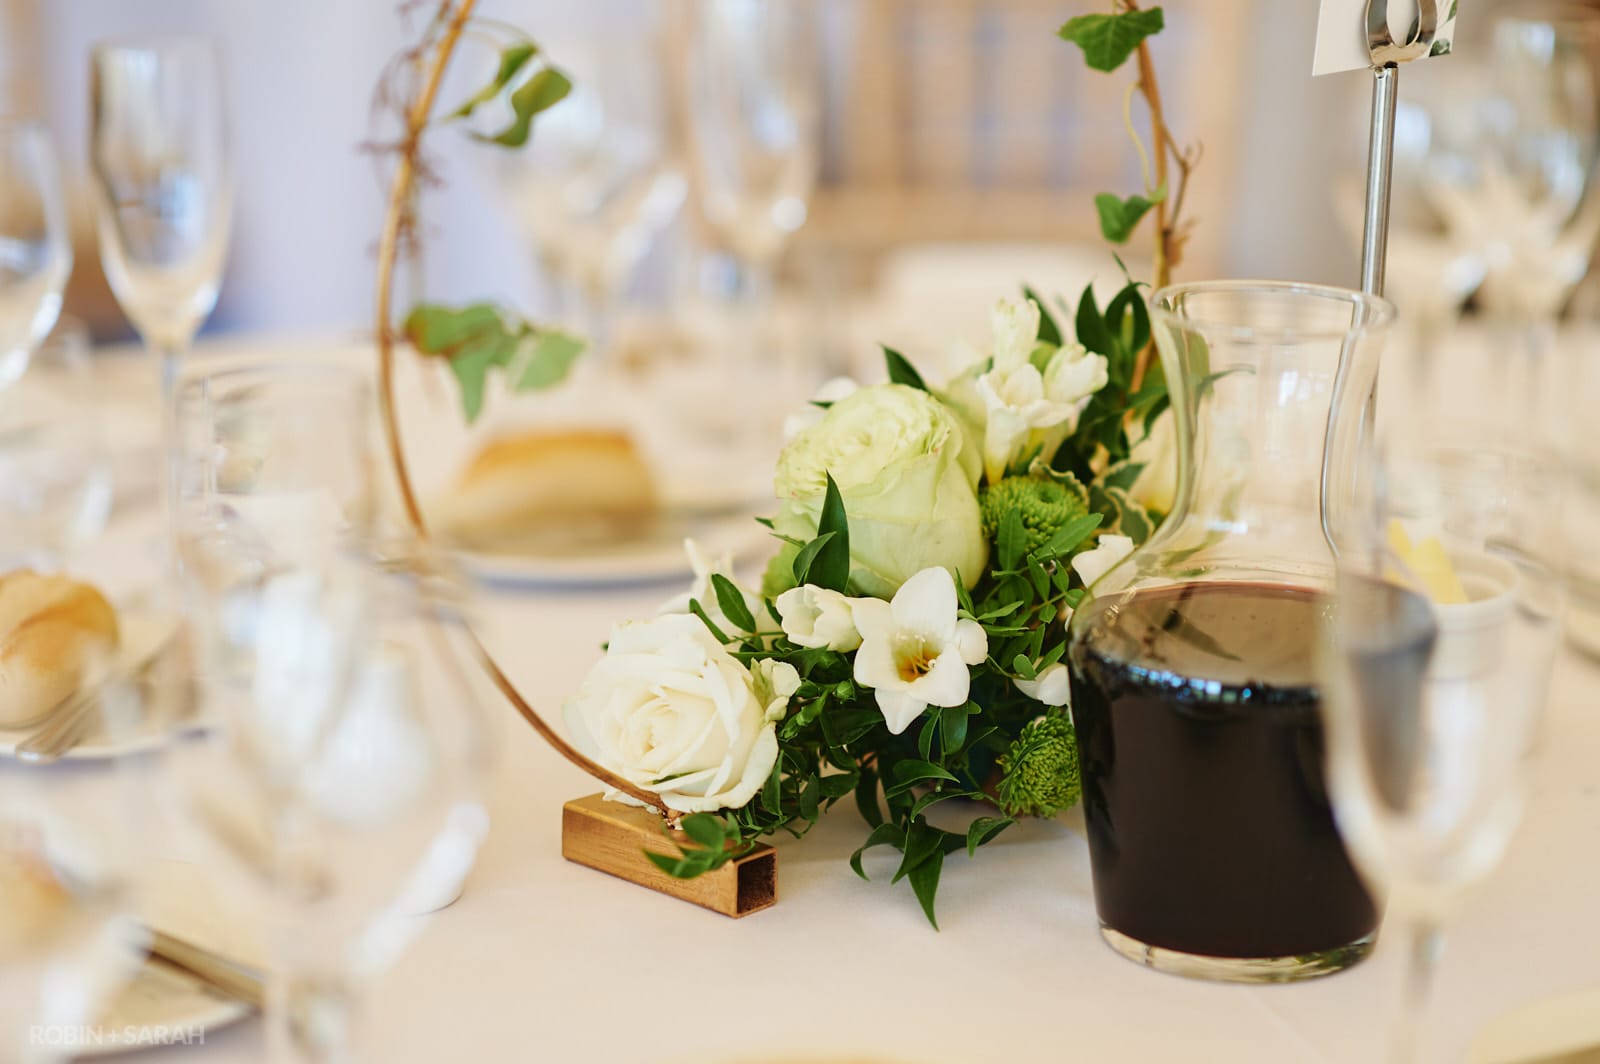 Table details for wedding meal